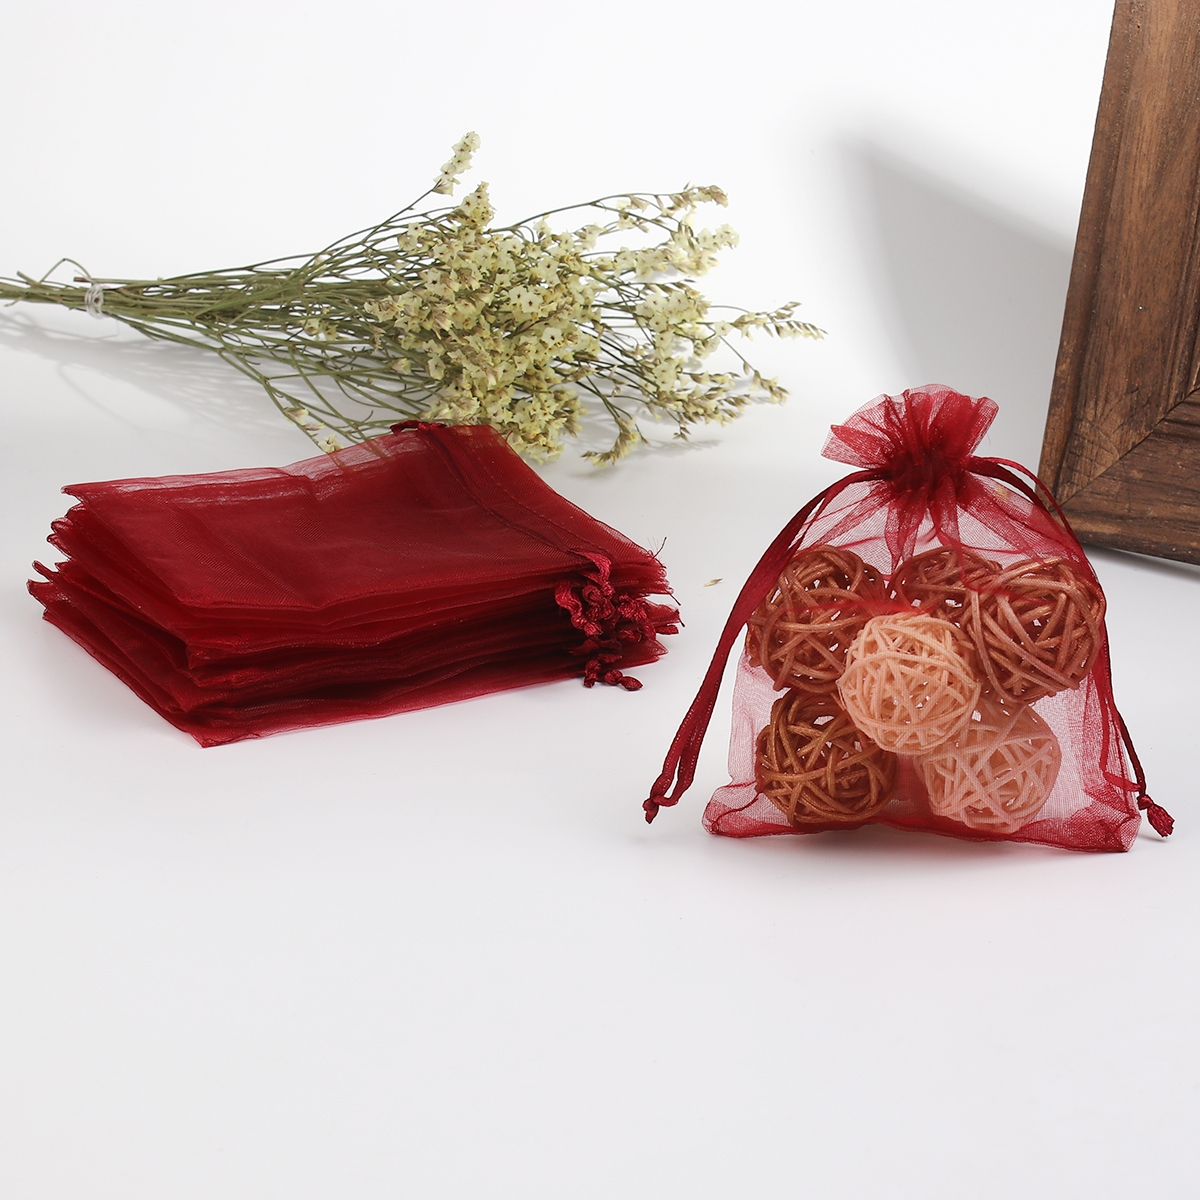 Picture of Wedding Gift Organza Jewelry Bags Drawstring Rectangle Wine Red (Usable Space: 9.5x9cm) 12cm(4 6/8") x 9cm(3 4/8"), 50 PCs